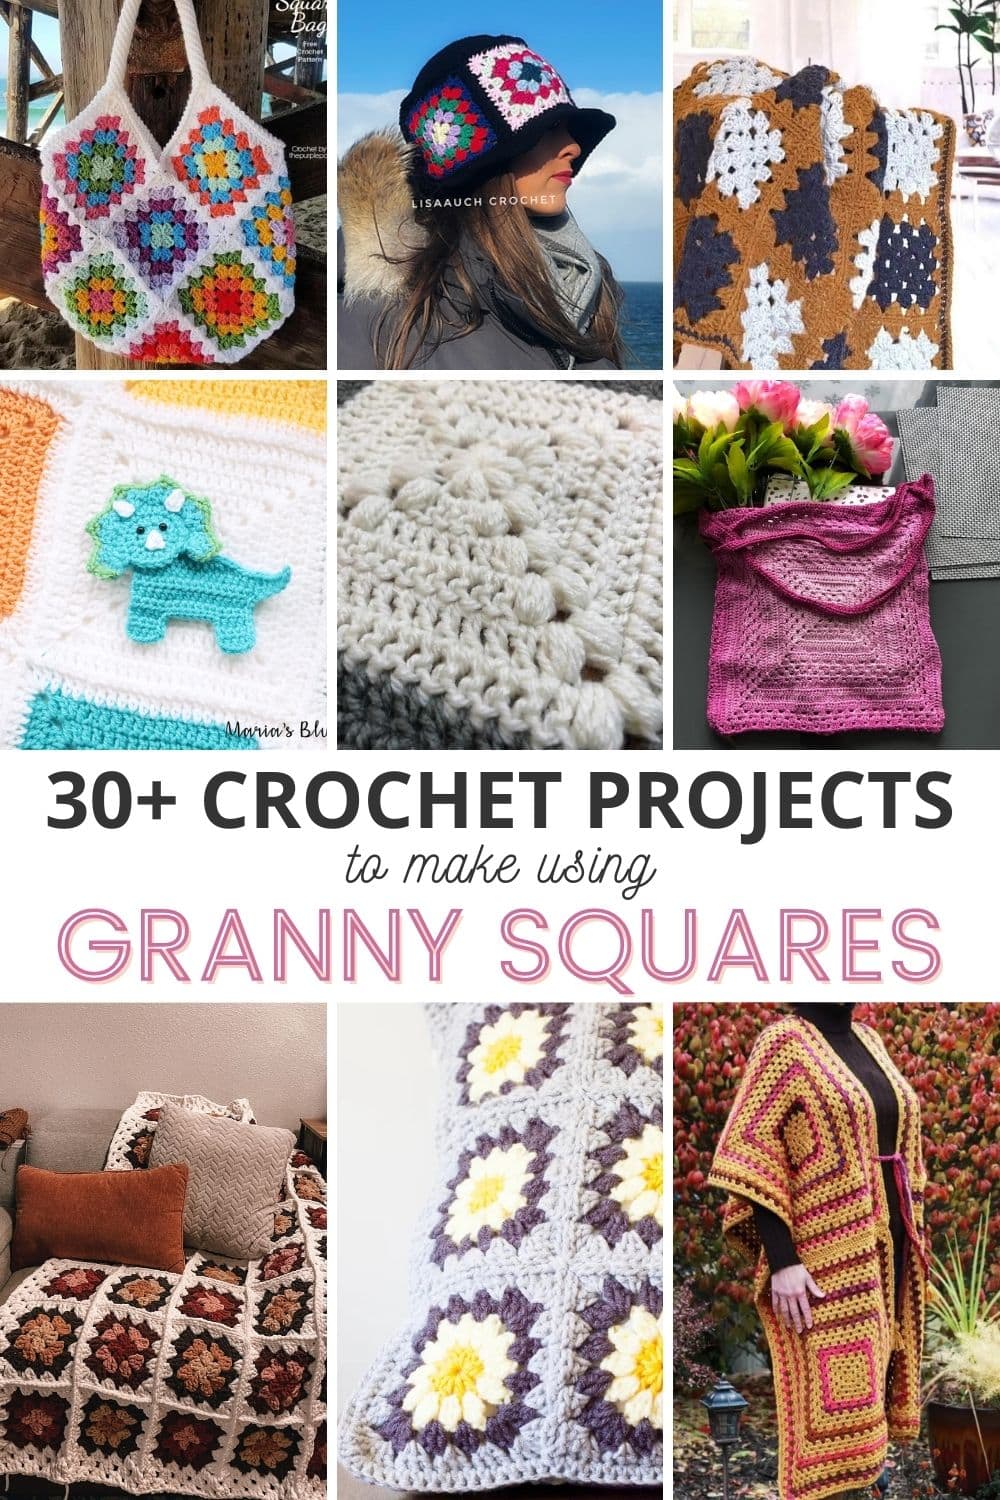 30+ Crochet Projects You Can Make Using Granny Squares via @sigonimacaronii